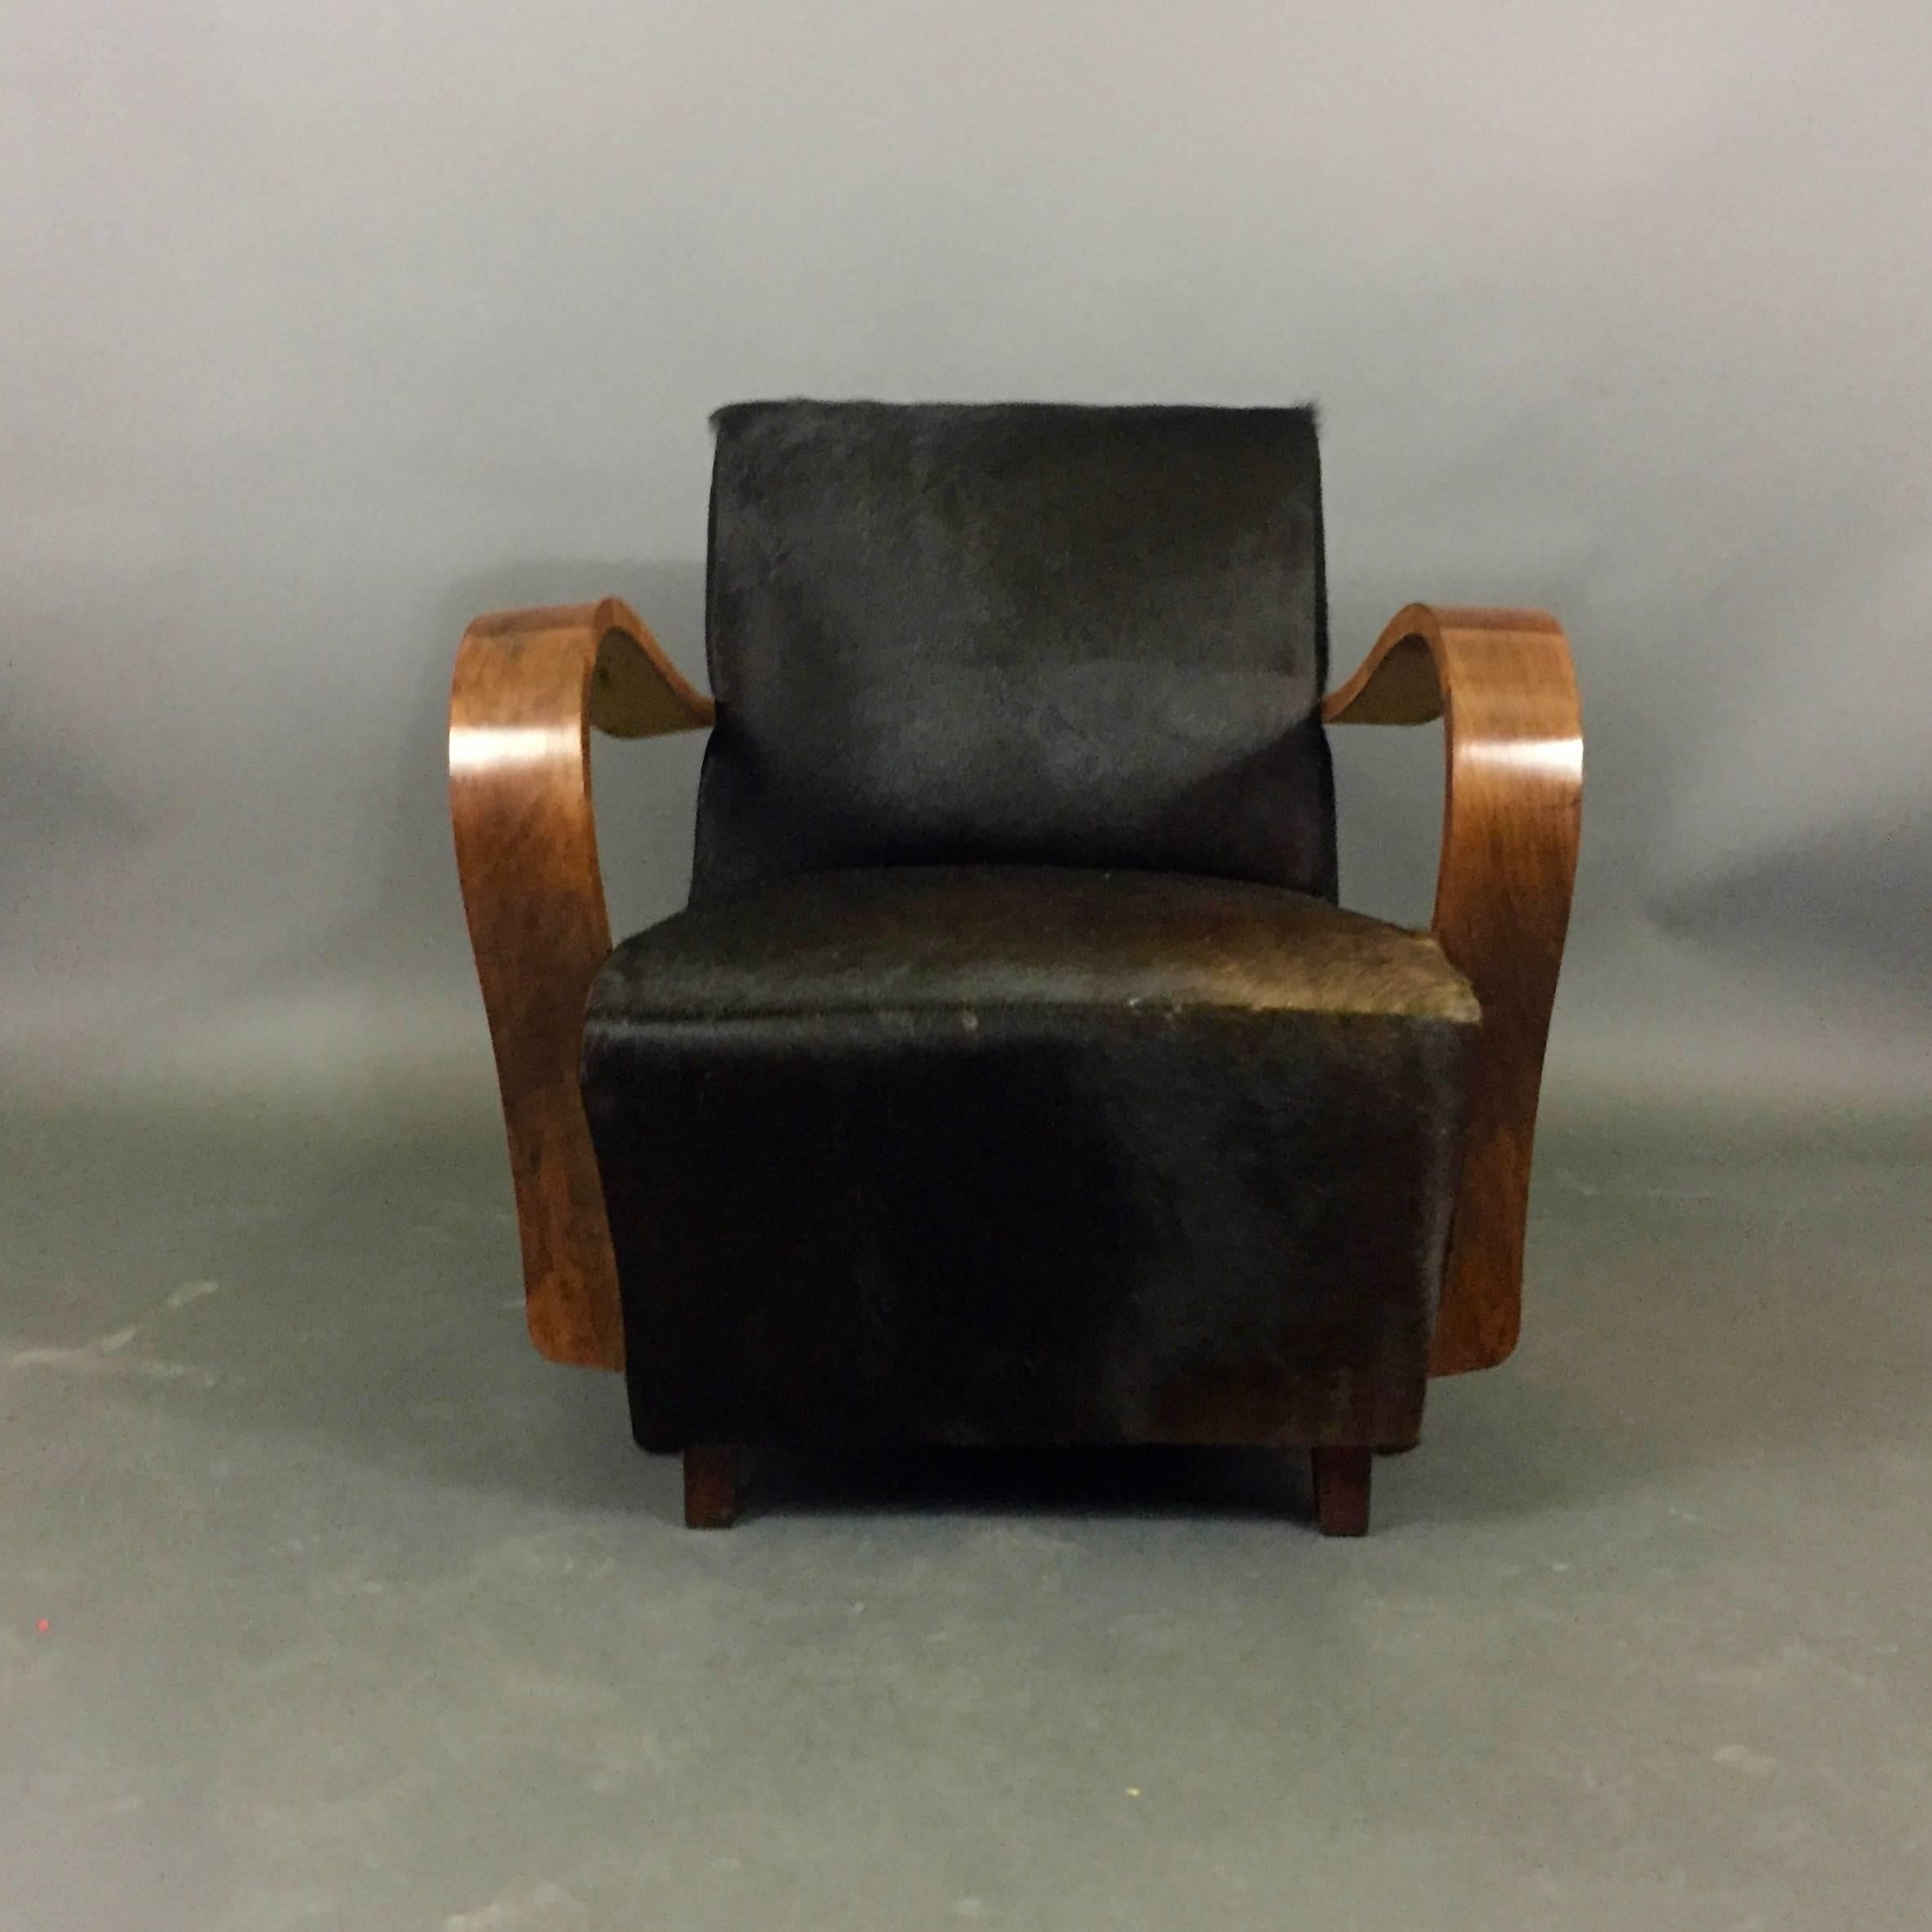 We are uncertain of the origin of this pair of lounge chairs - though think Austria in the 1930s likely possibility - and purely in the Art Deco tradition with wide sweeping and curved-arms, beautifully refinished. Recent luxe black cowhide